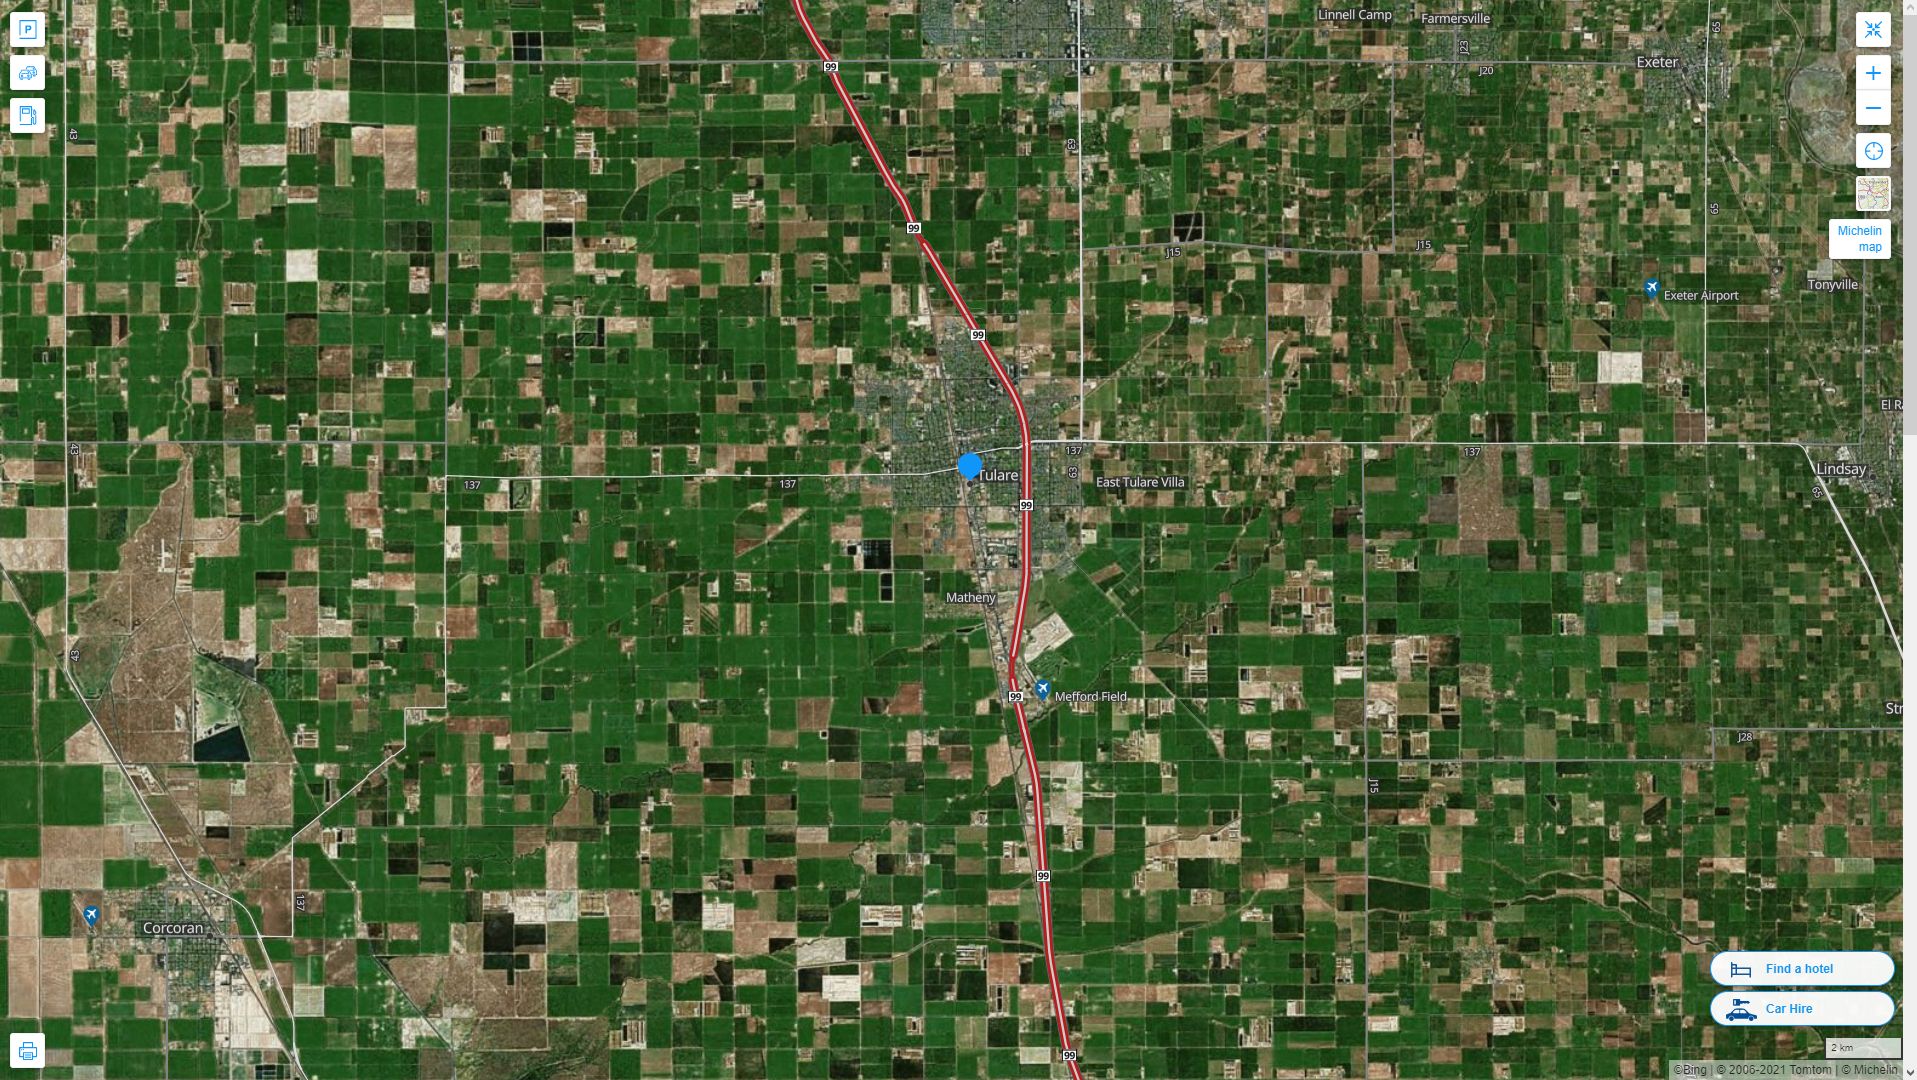 Tulare California Highway and Road Map with Satellite View